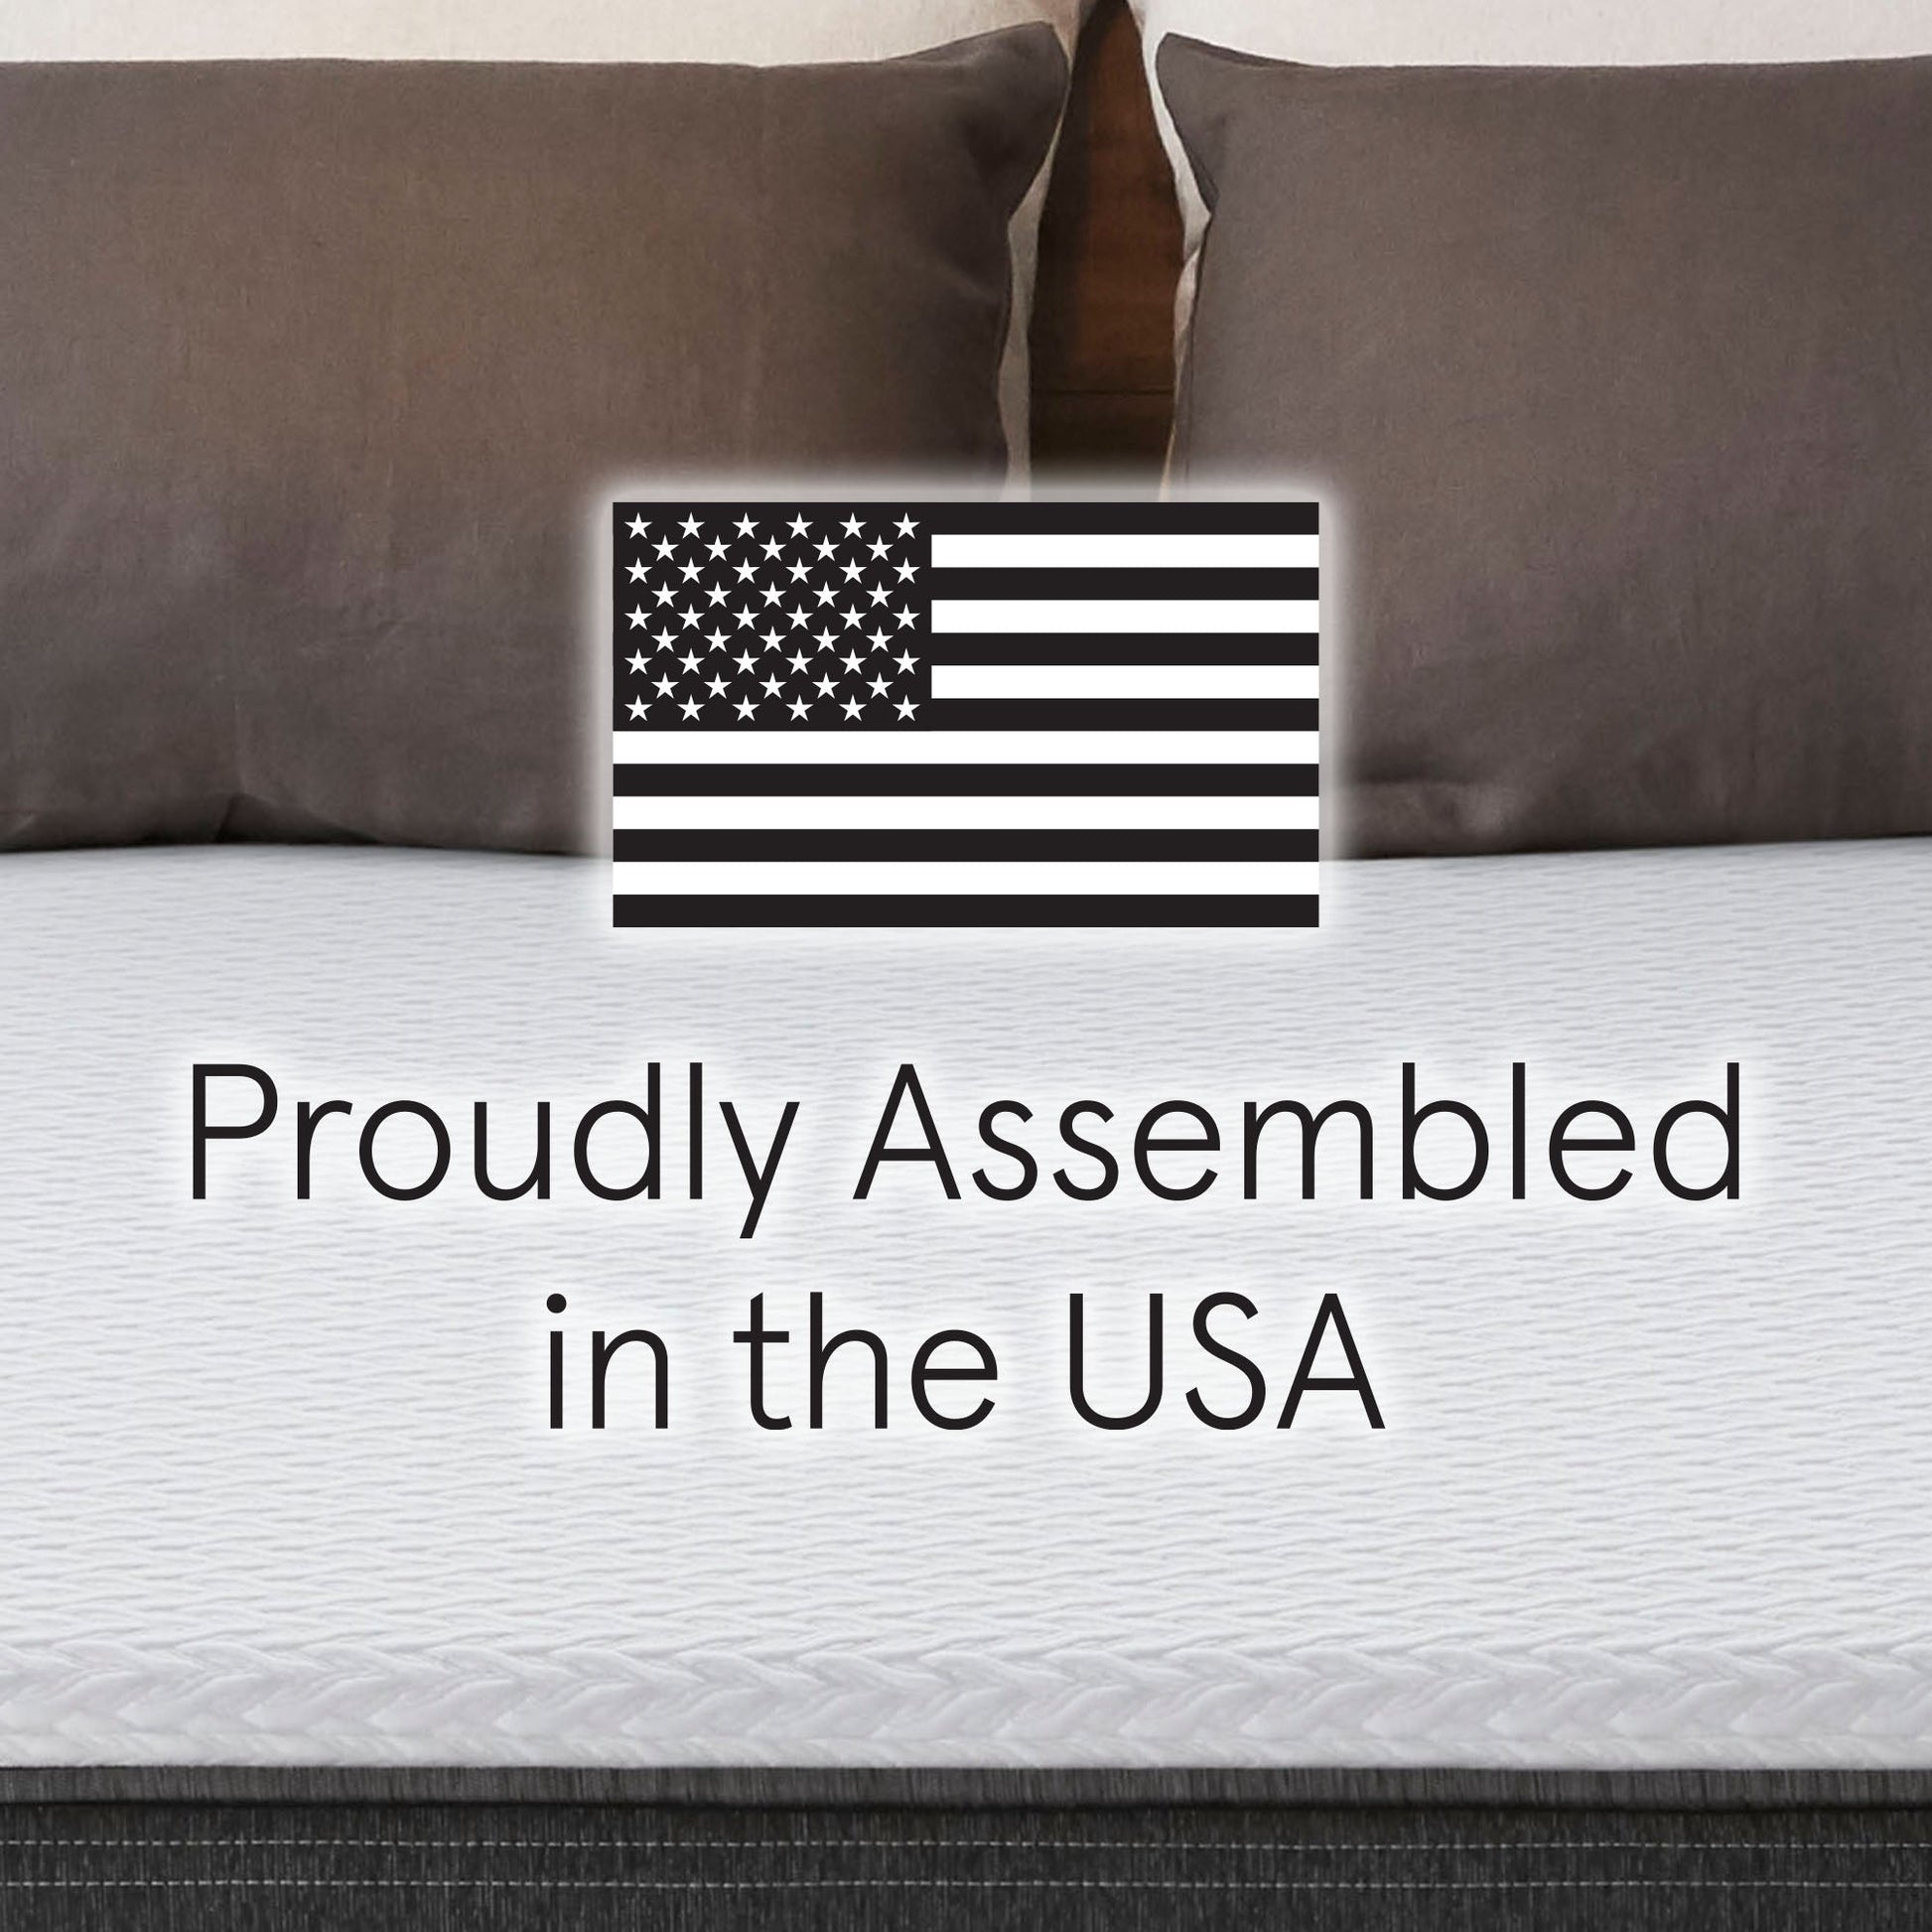 Beautyrest Reach Mt. Radiance Hybrid Plush Mattress Proudly assembled in the USA